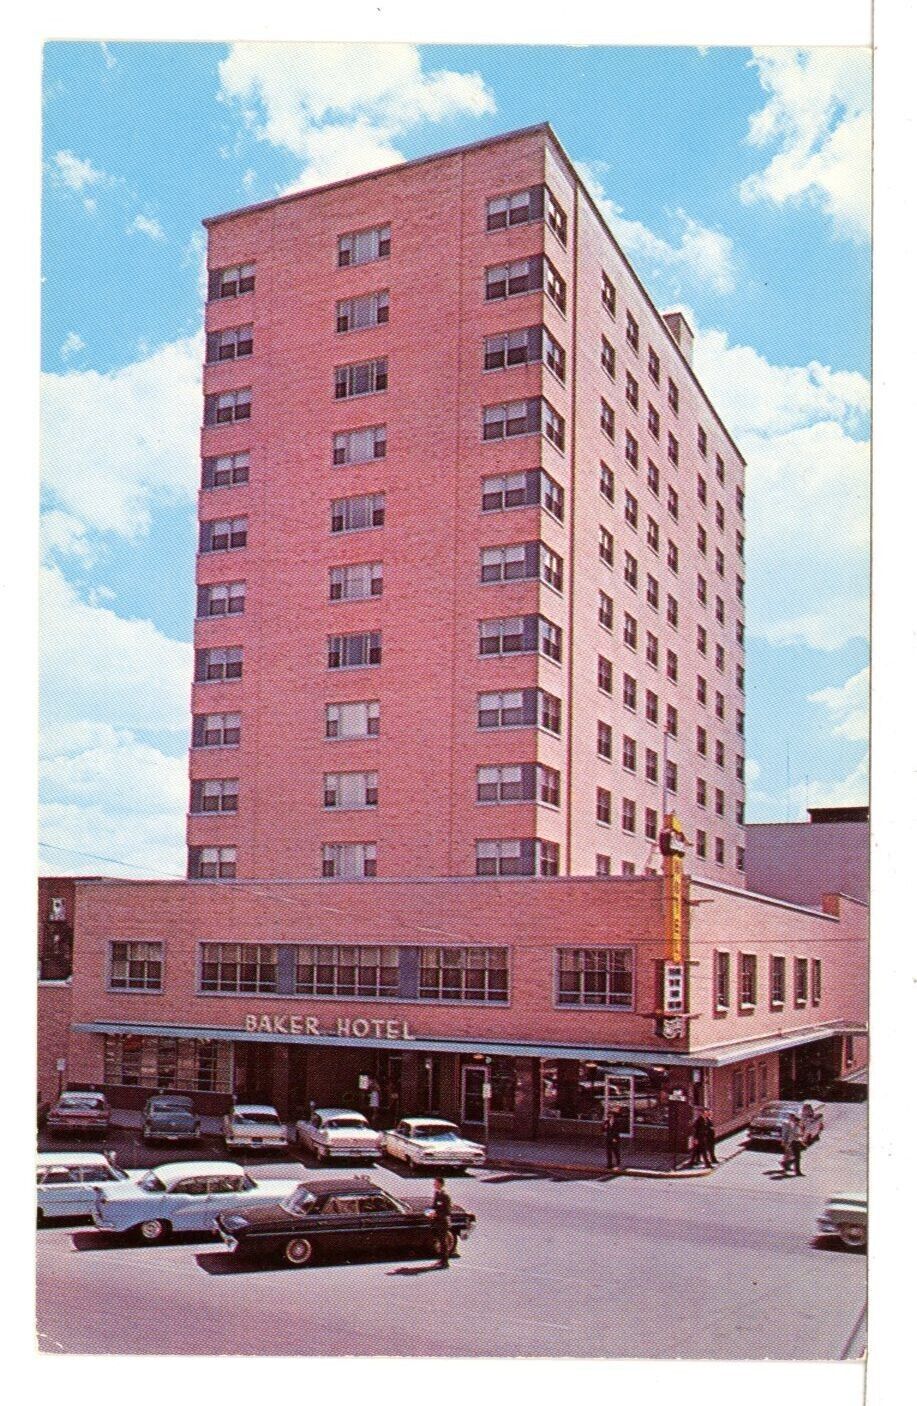 Baker Hotel and Vintage Autos 1950\'s, Greetings from Hutchinson KS Postcard